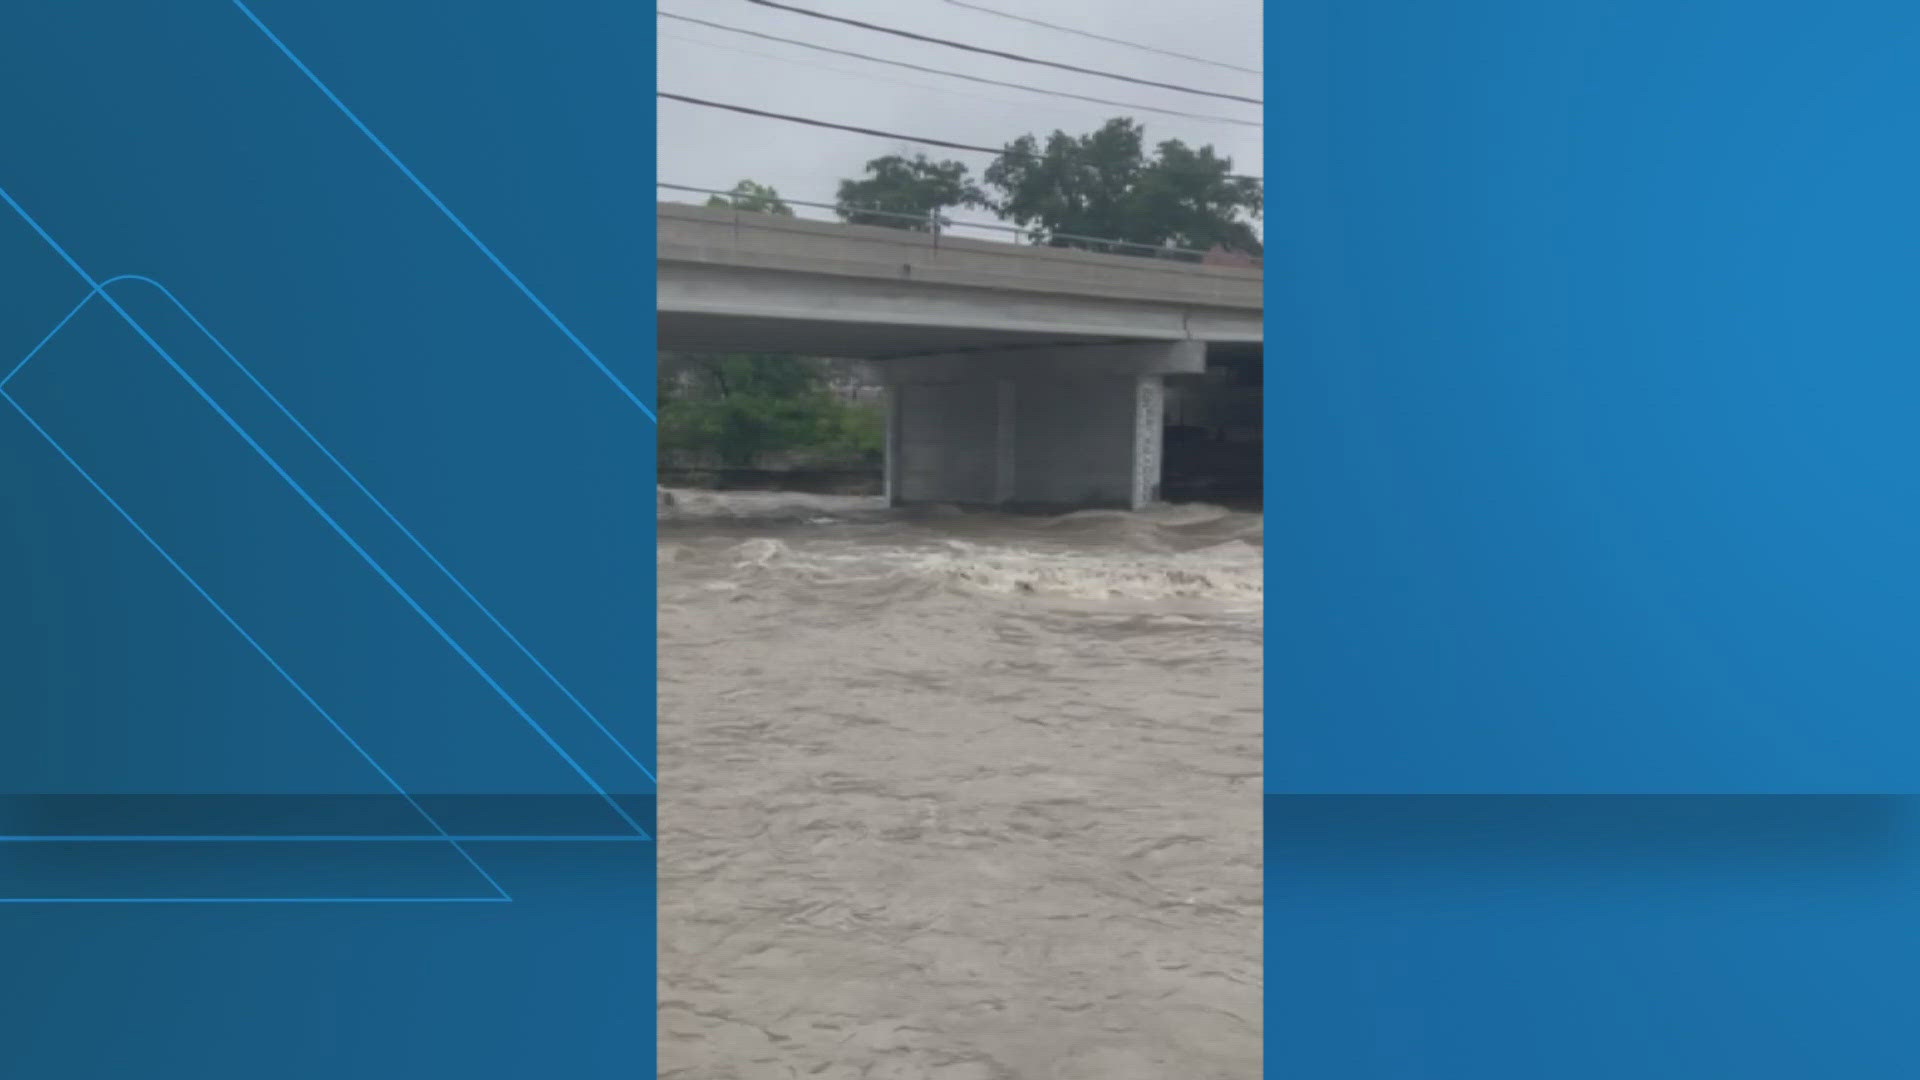 Video shows high waters rushing down Nolan Creek after severe weather and heavy rain swept through Central Texas on Mother's Day.